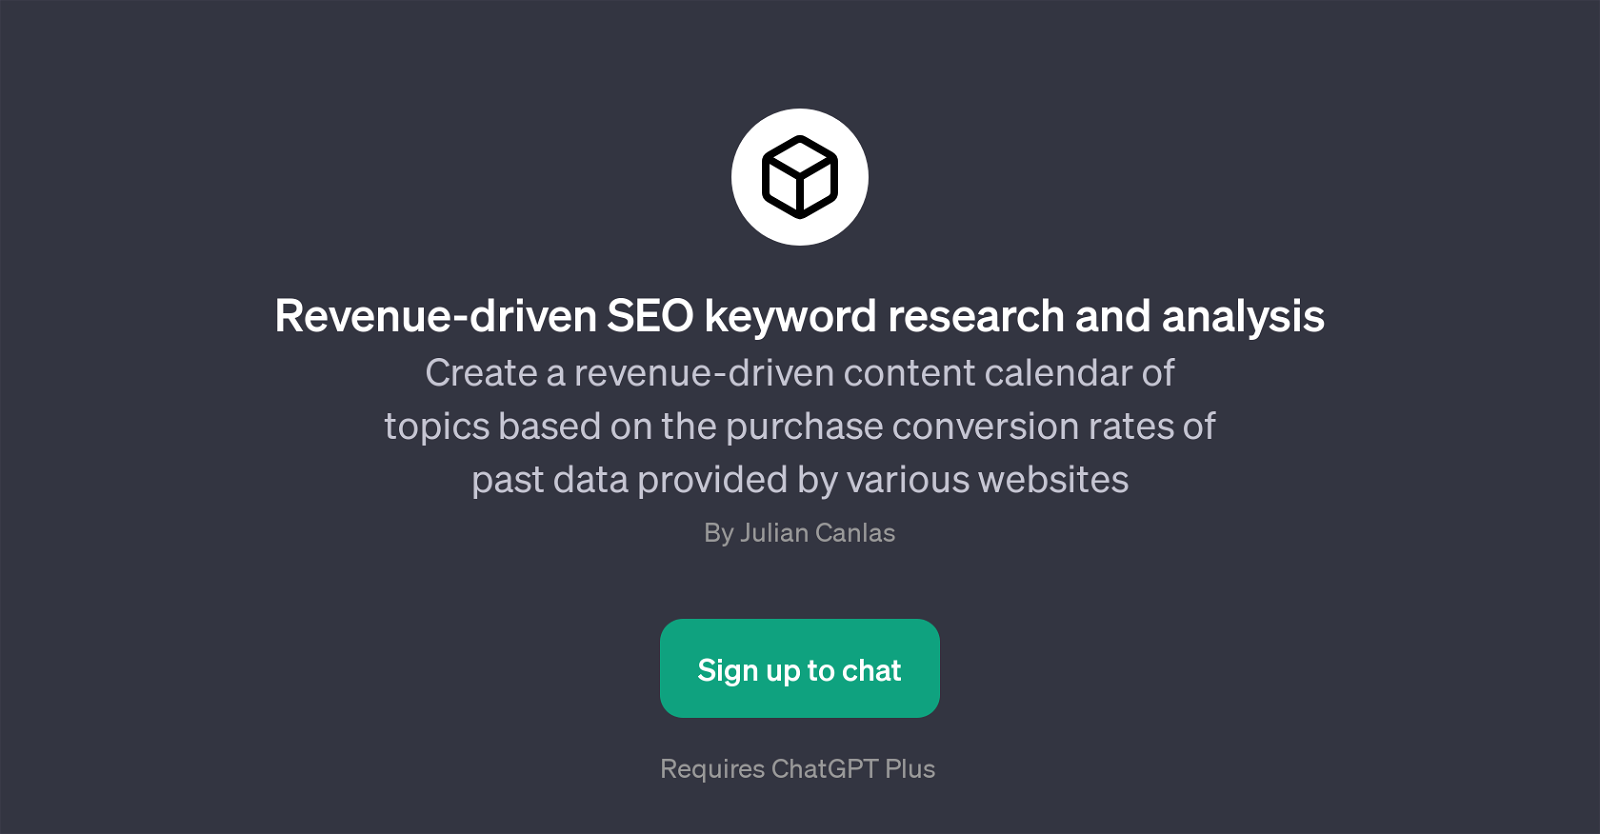 Revenue-driven SEO keyword research and analysis website